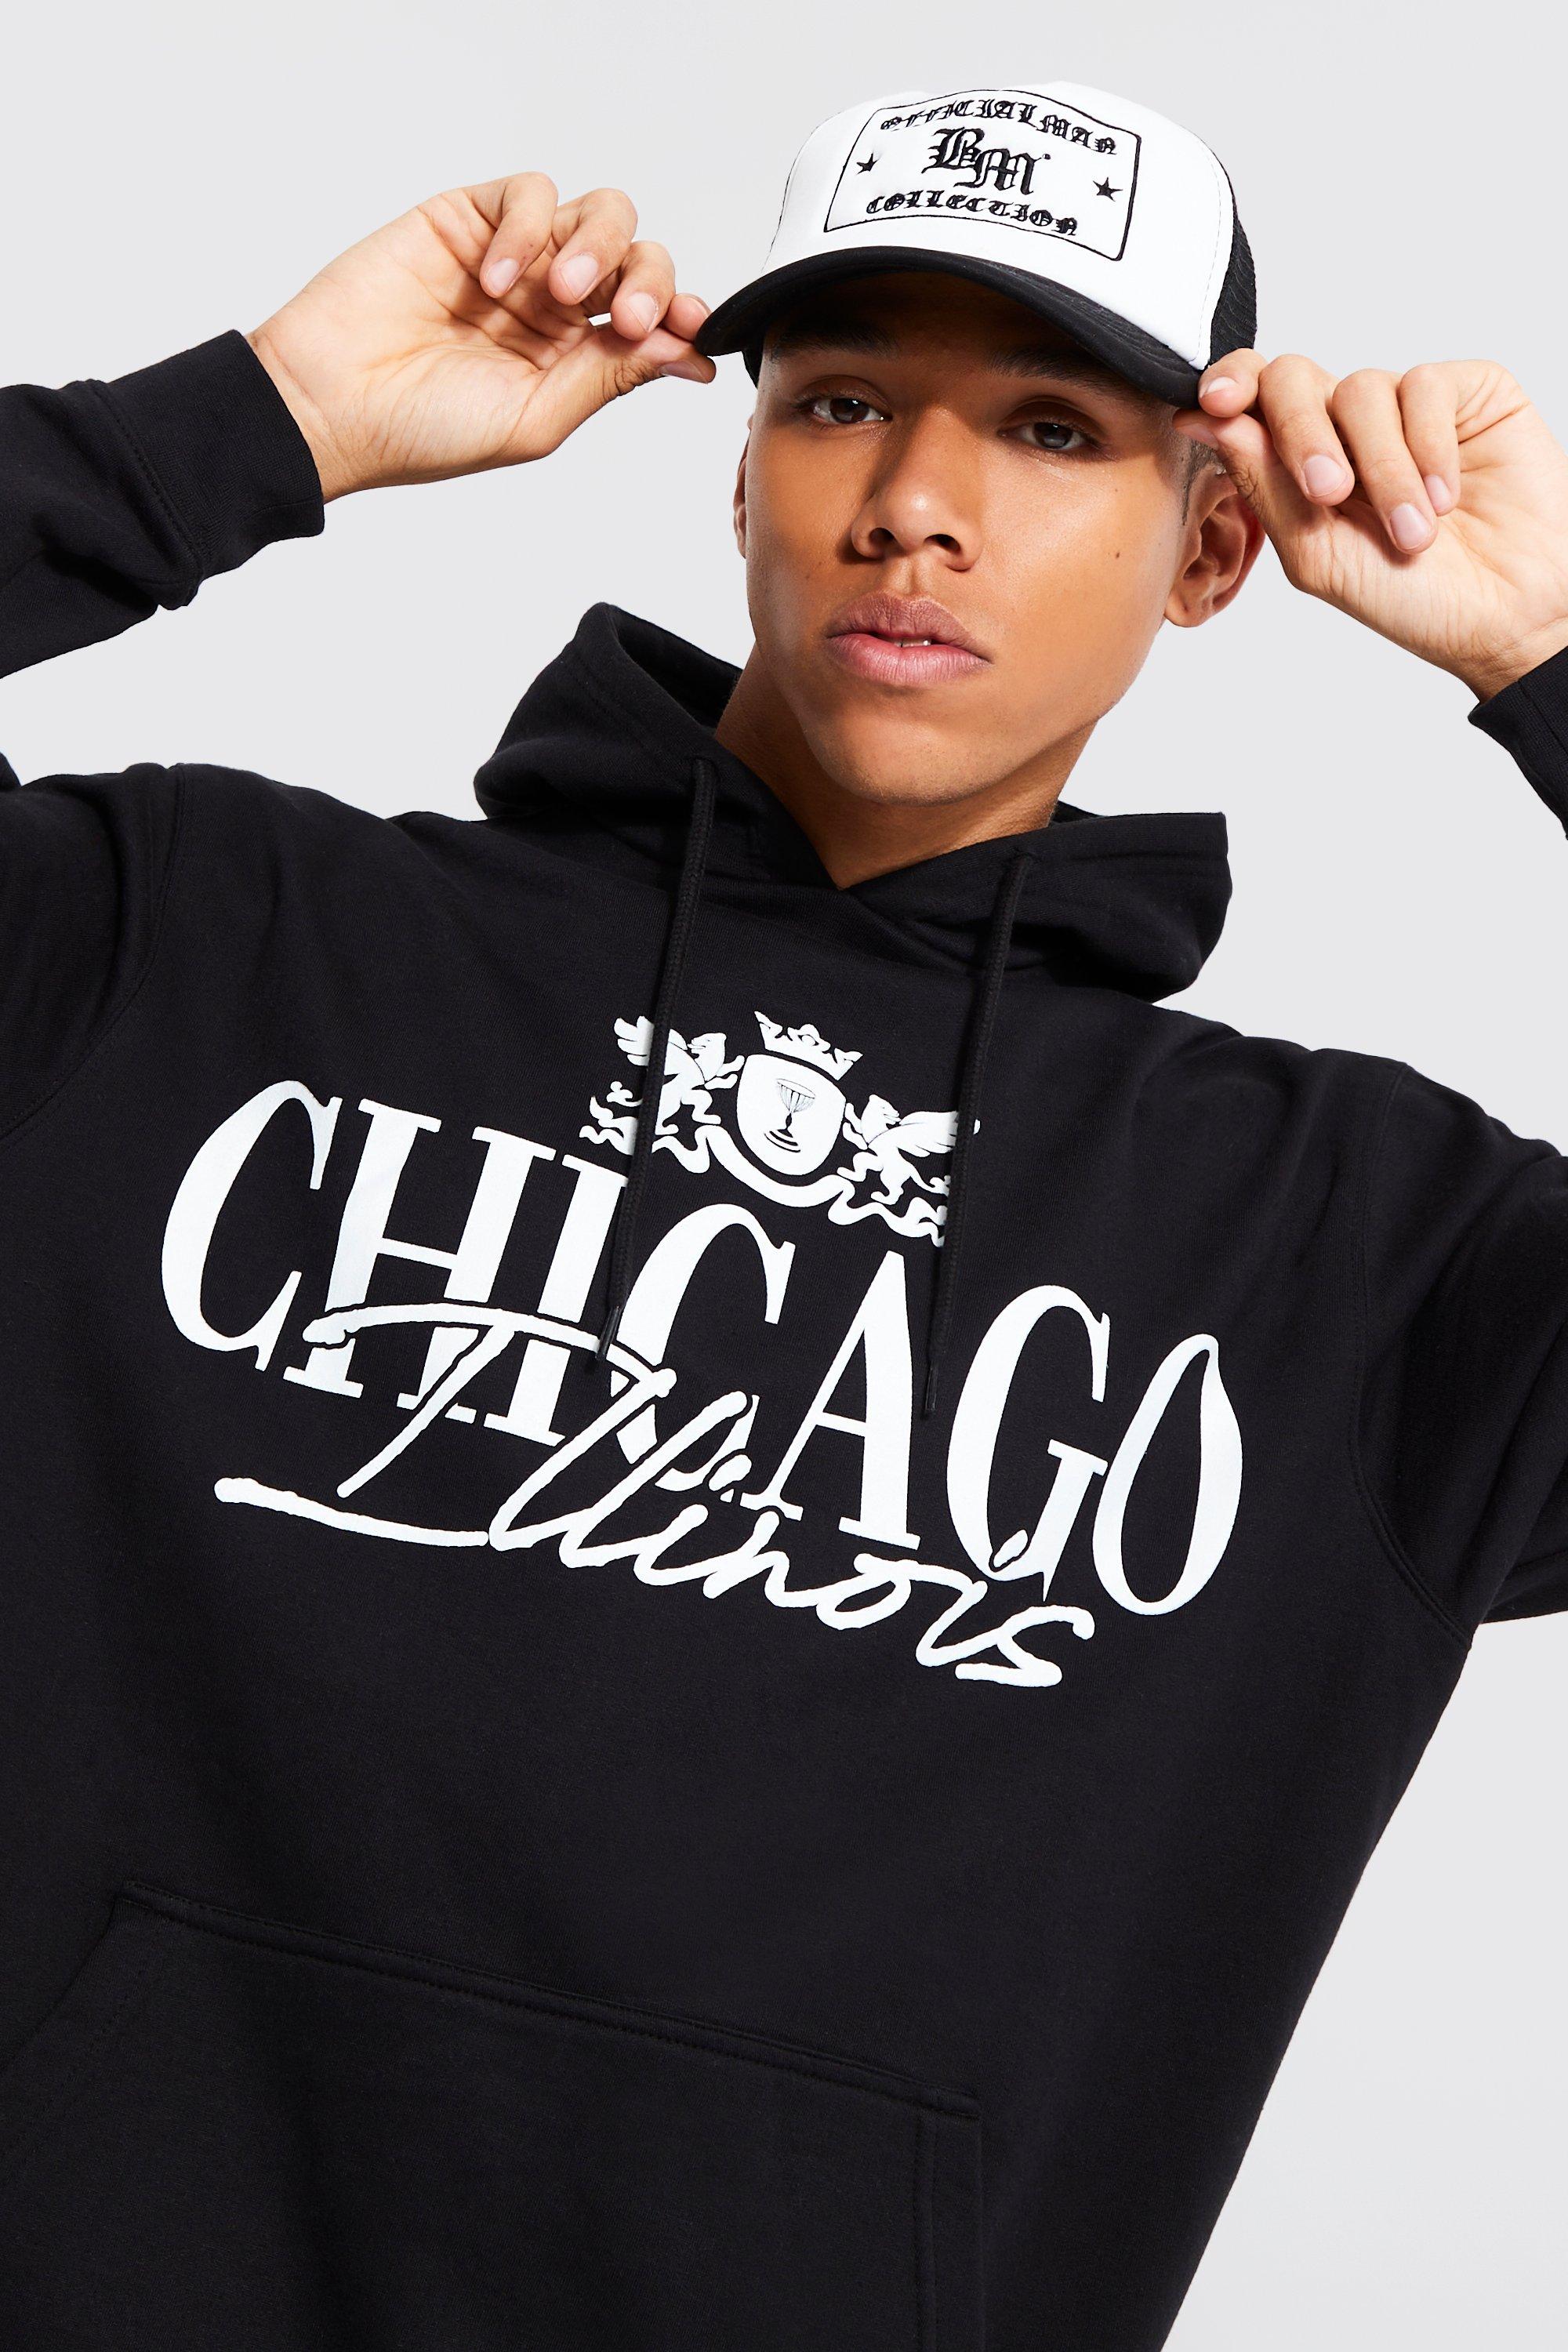 Collected Co. Chicago Hoodie